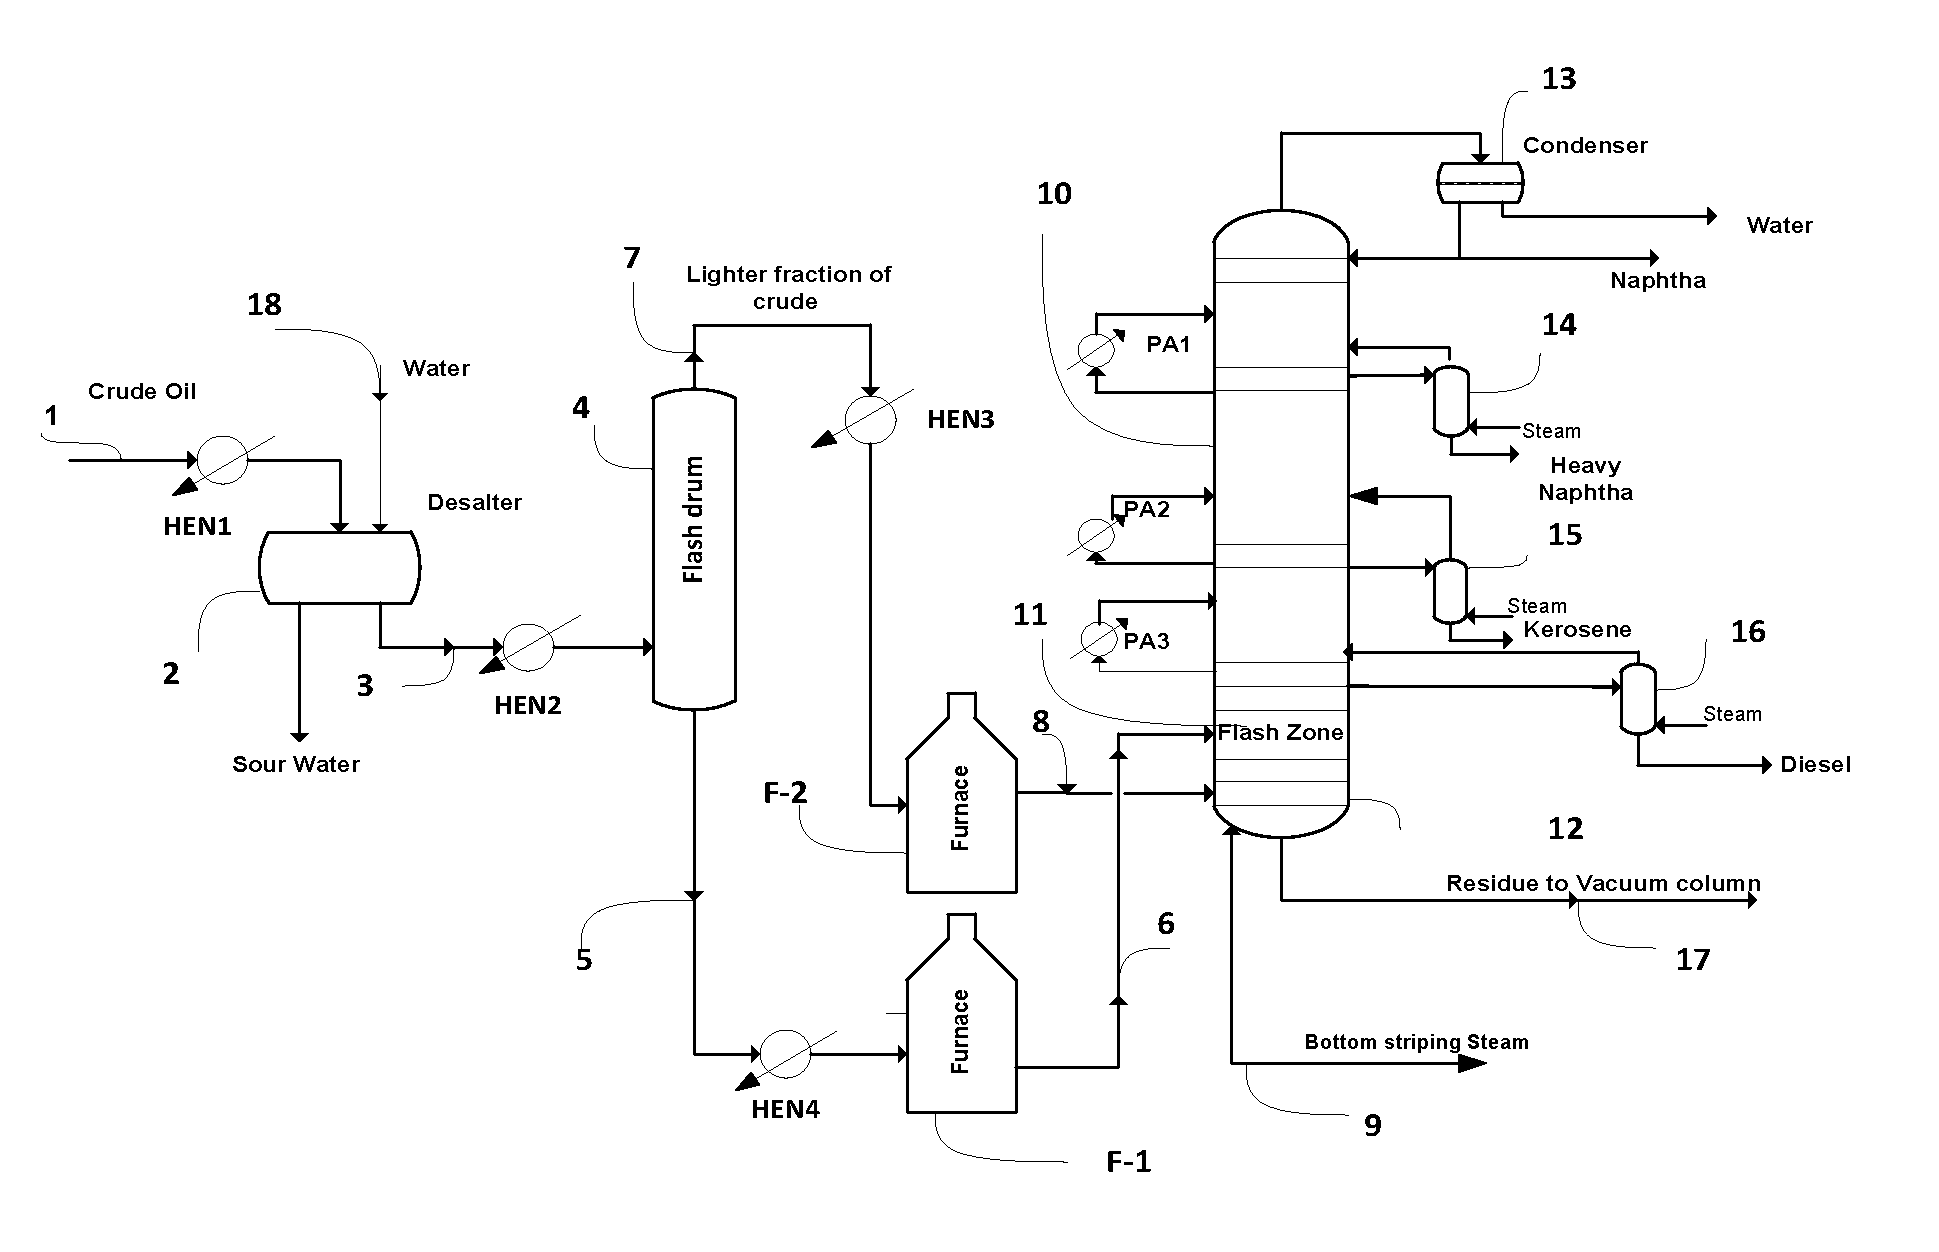 Method for increasing gas oil yield and energy efficiency in crude oil distillation